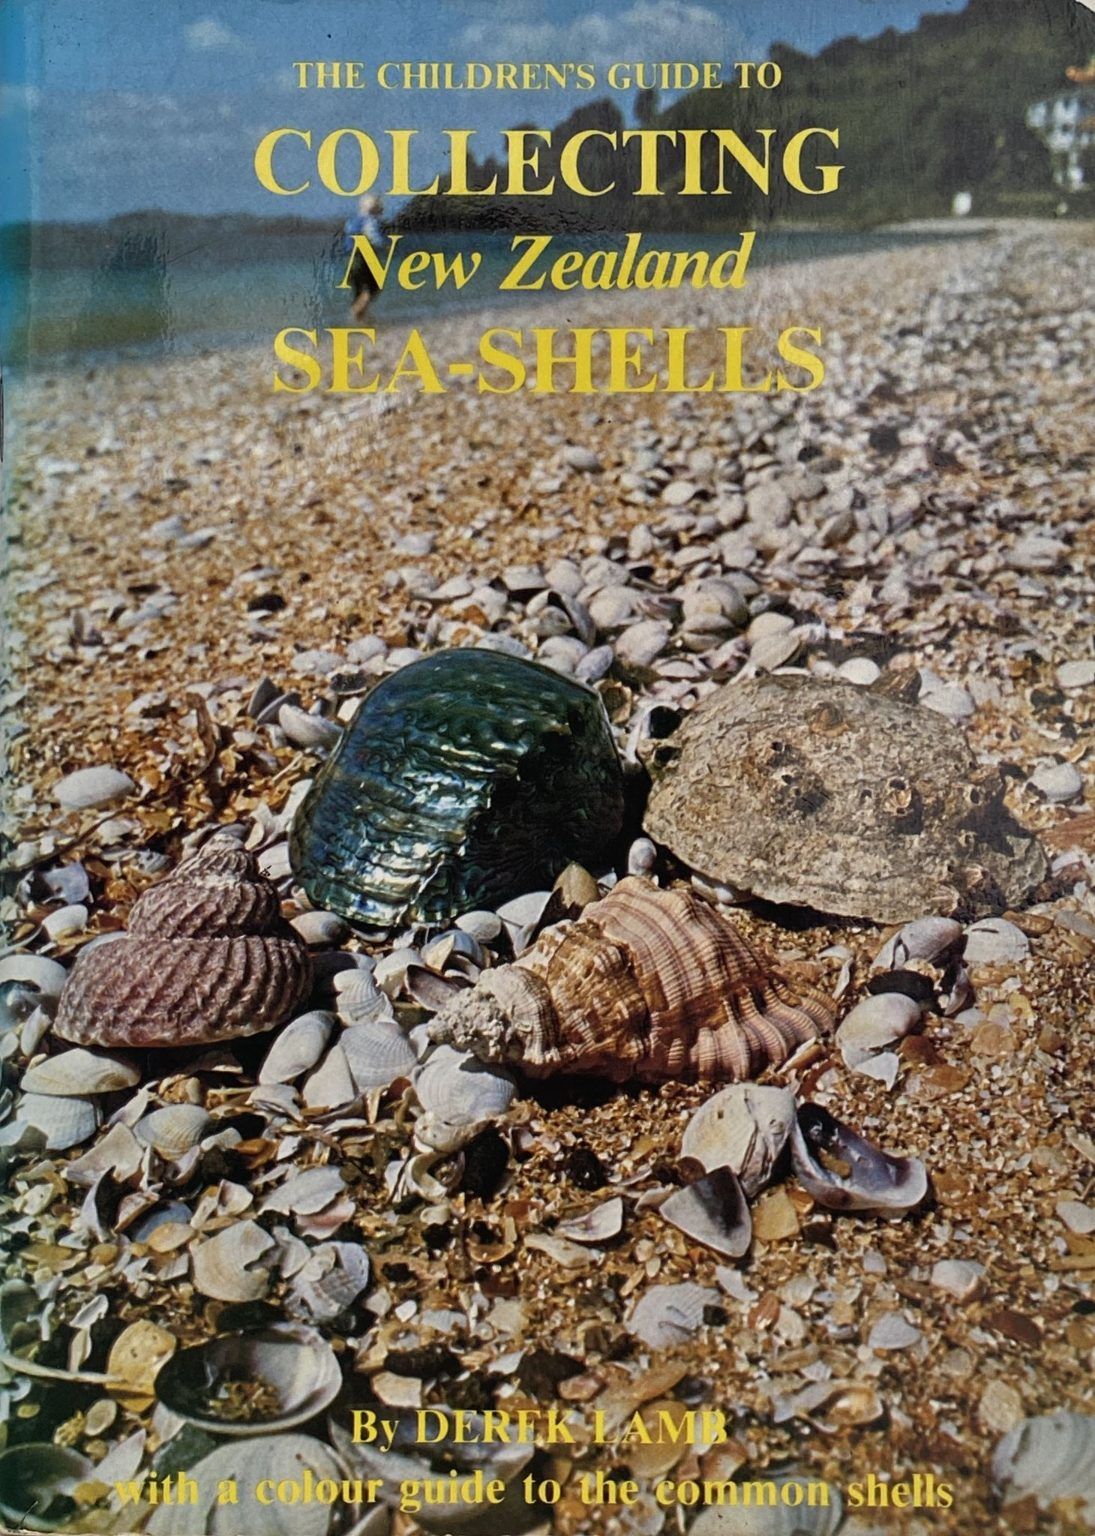 COLLECTING NEW ZEALAND SEA SHELLS The Children's Guide